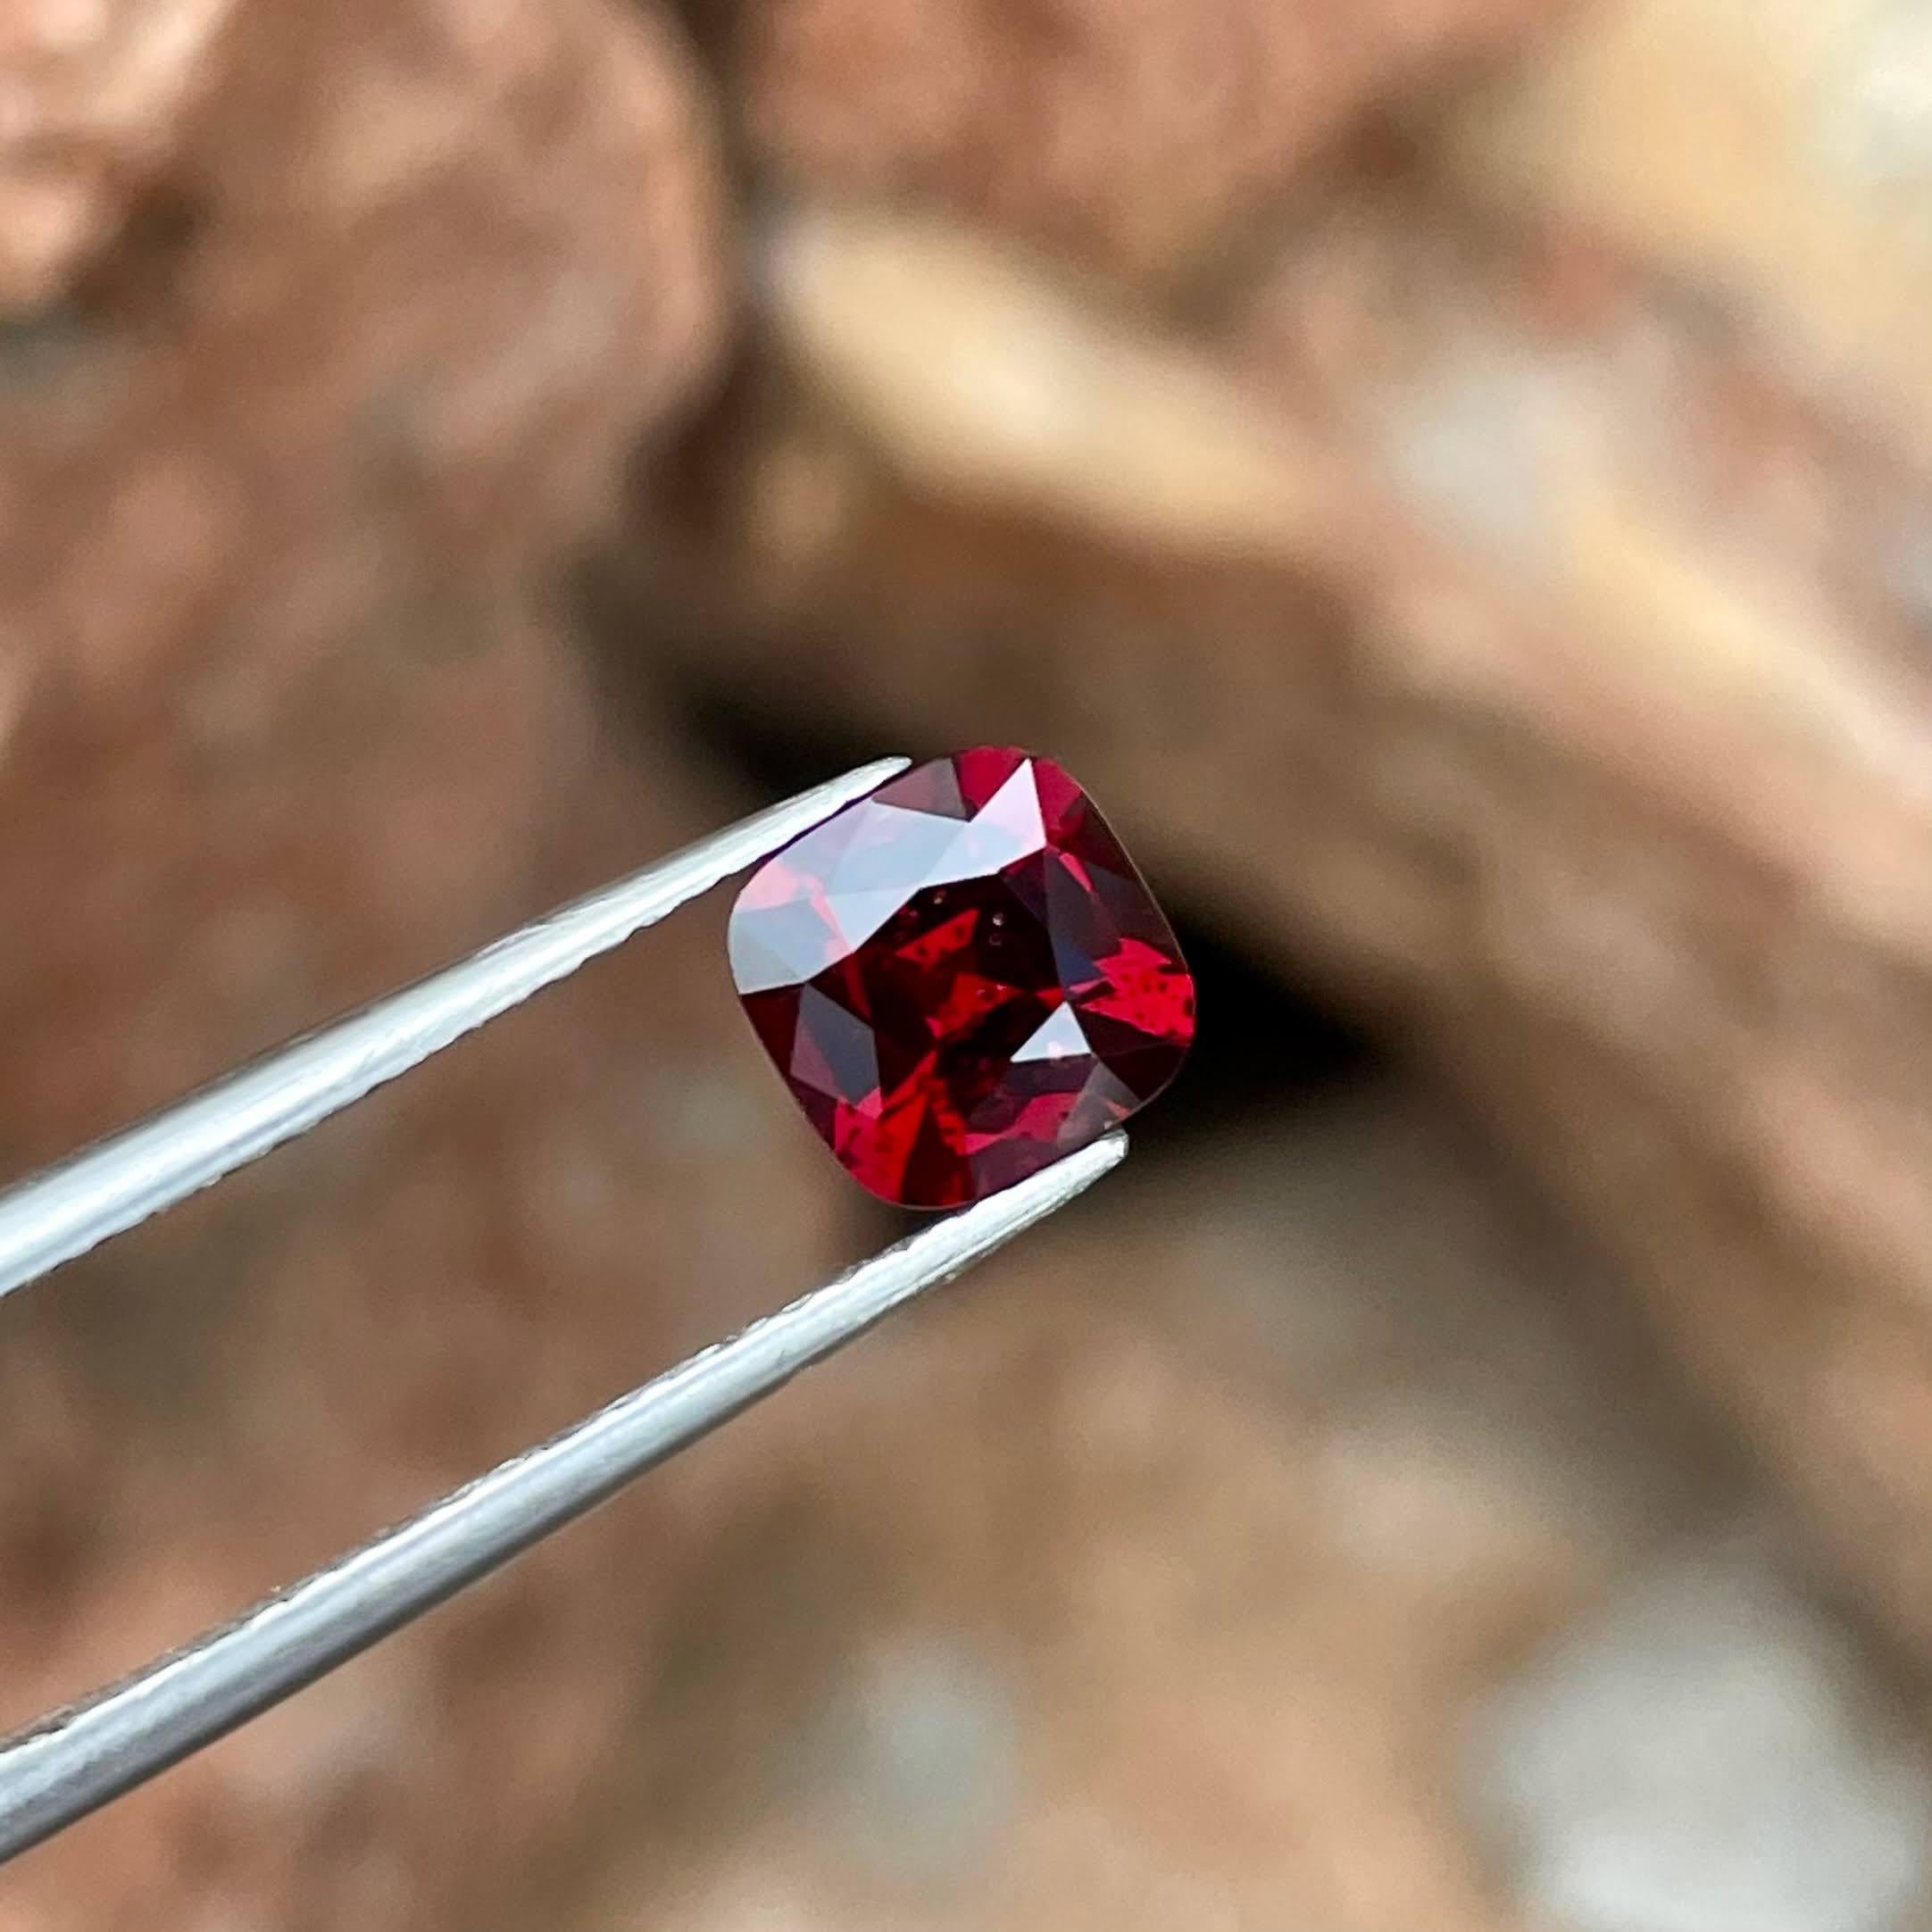 Weight 1.50 carats 
Dimensions 6.5x6.5x4.5 mm
Treatment none 
Origin Burma 
Clarity VVS
Shape cushion 
Cut fancy cushion 




Behold the allure of this exquisite 1.50 carats Natural Red Burmese Spinel, a gemstone of unparalleled beauty and rarity.